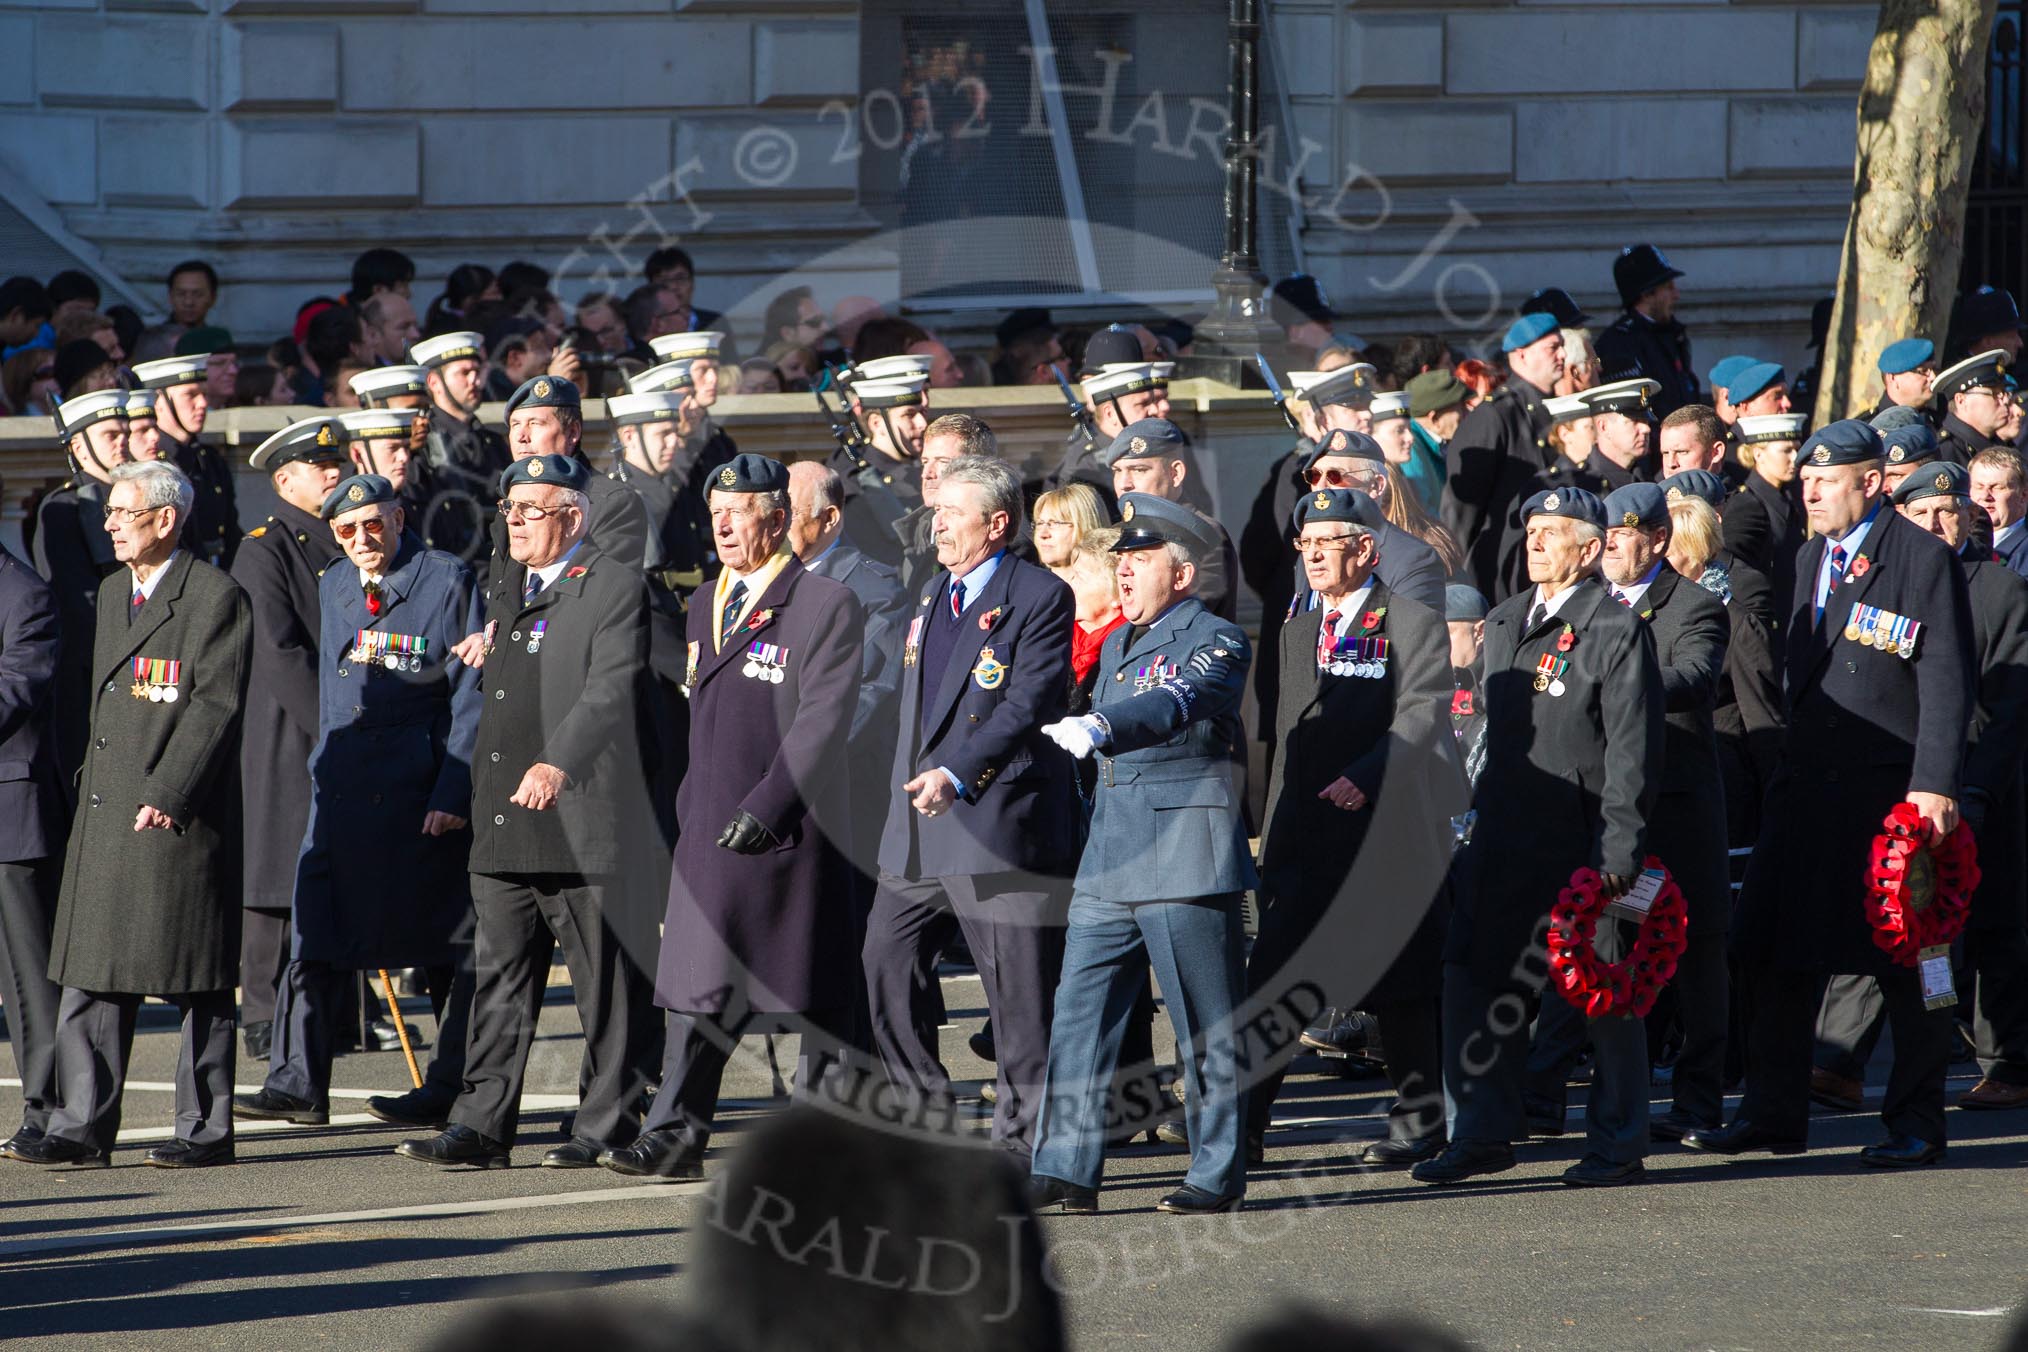 Remembrance Sunday 2012 Cenotaph March Past: Group C3 - Royal Air Forces Association..
Whitehall, Cenotaph,
London SW1,

United Kingdom,
on 11 November 2012 at 12:01, image #1073